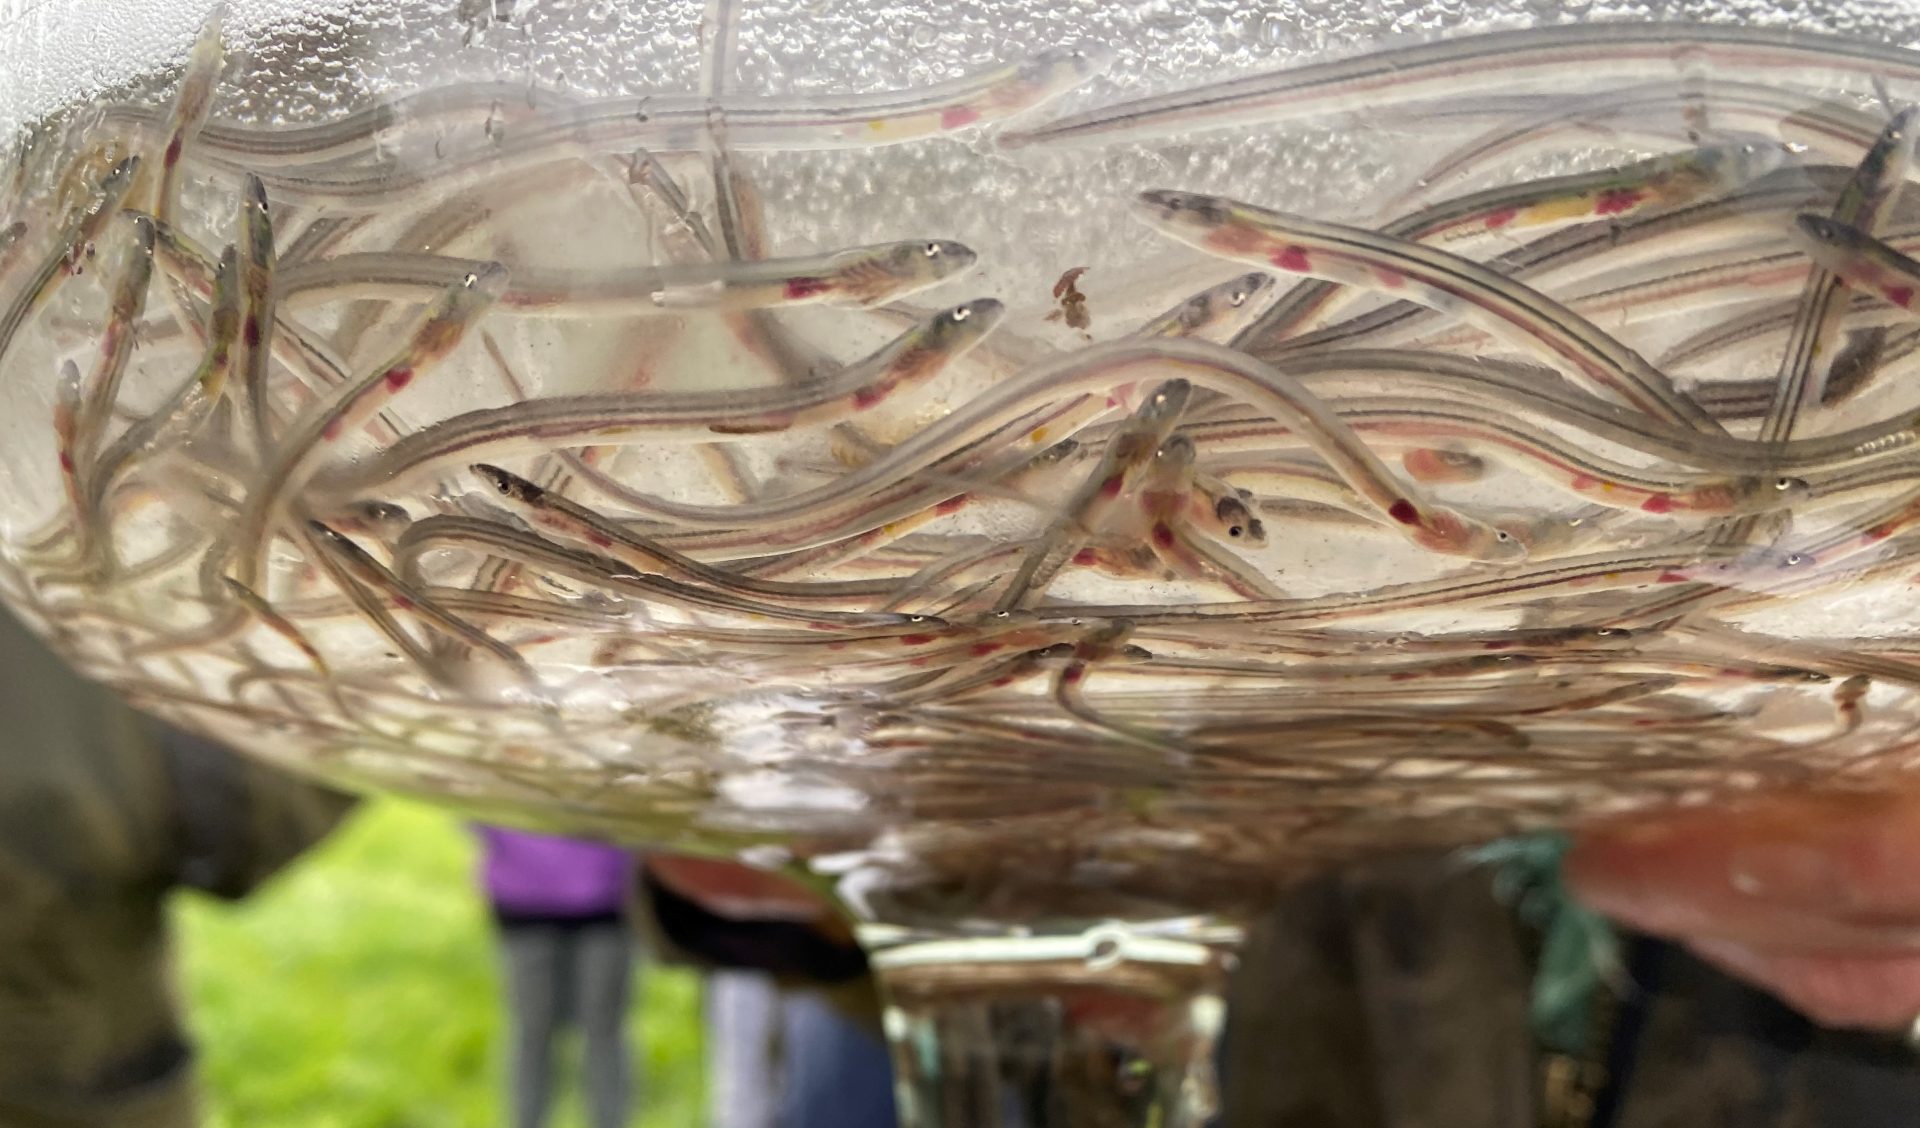 Baby eels, also known as  glass eels or elvers